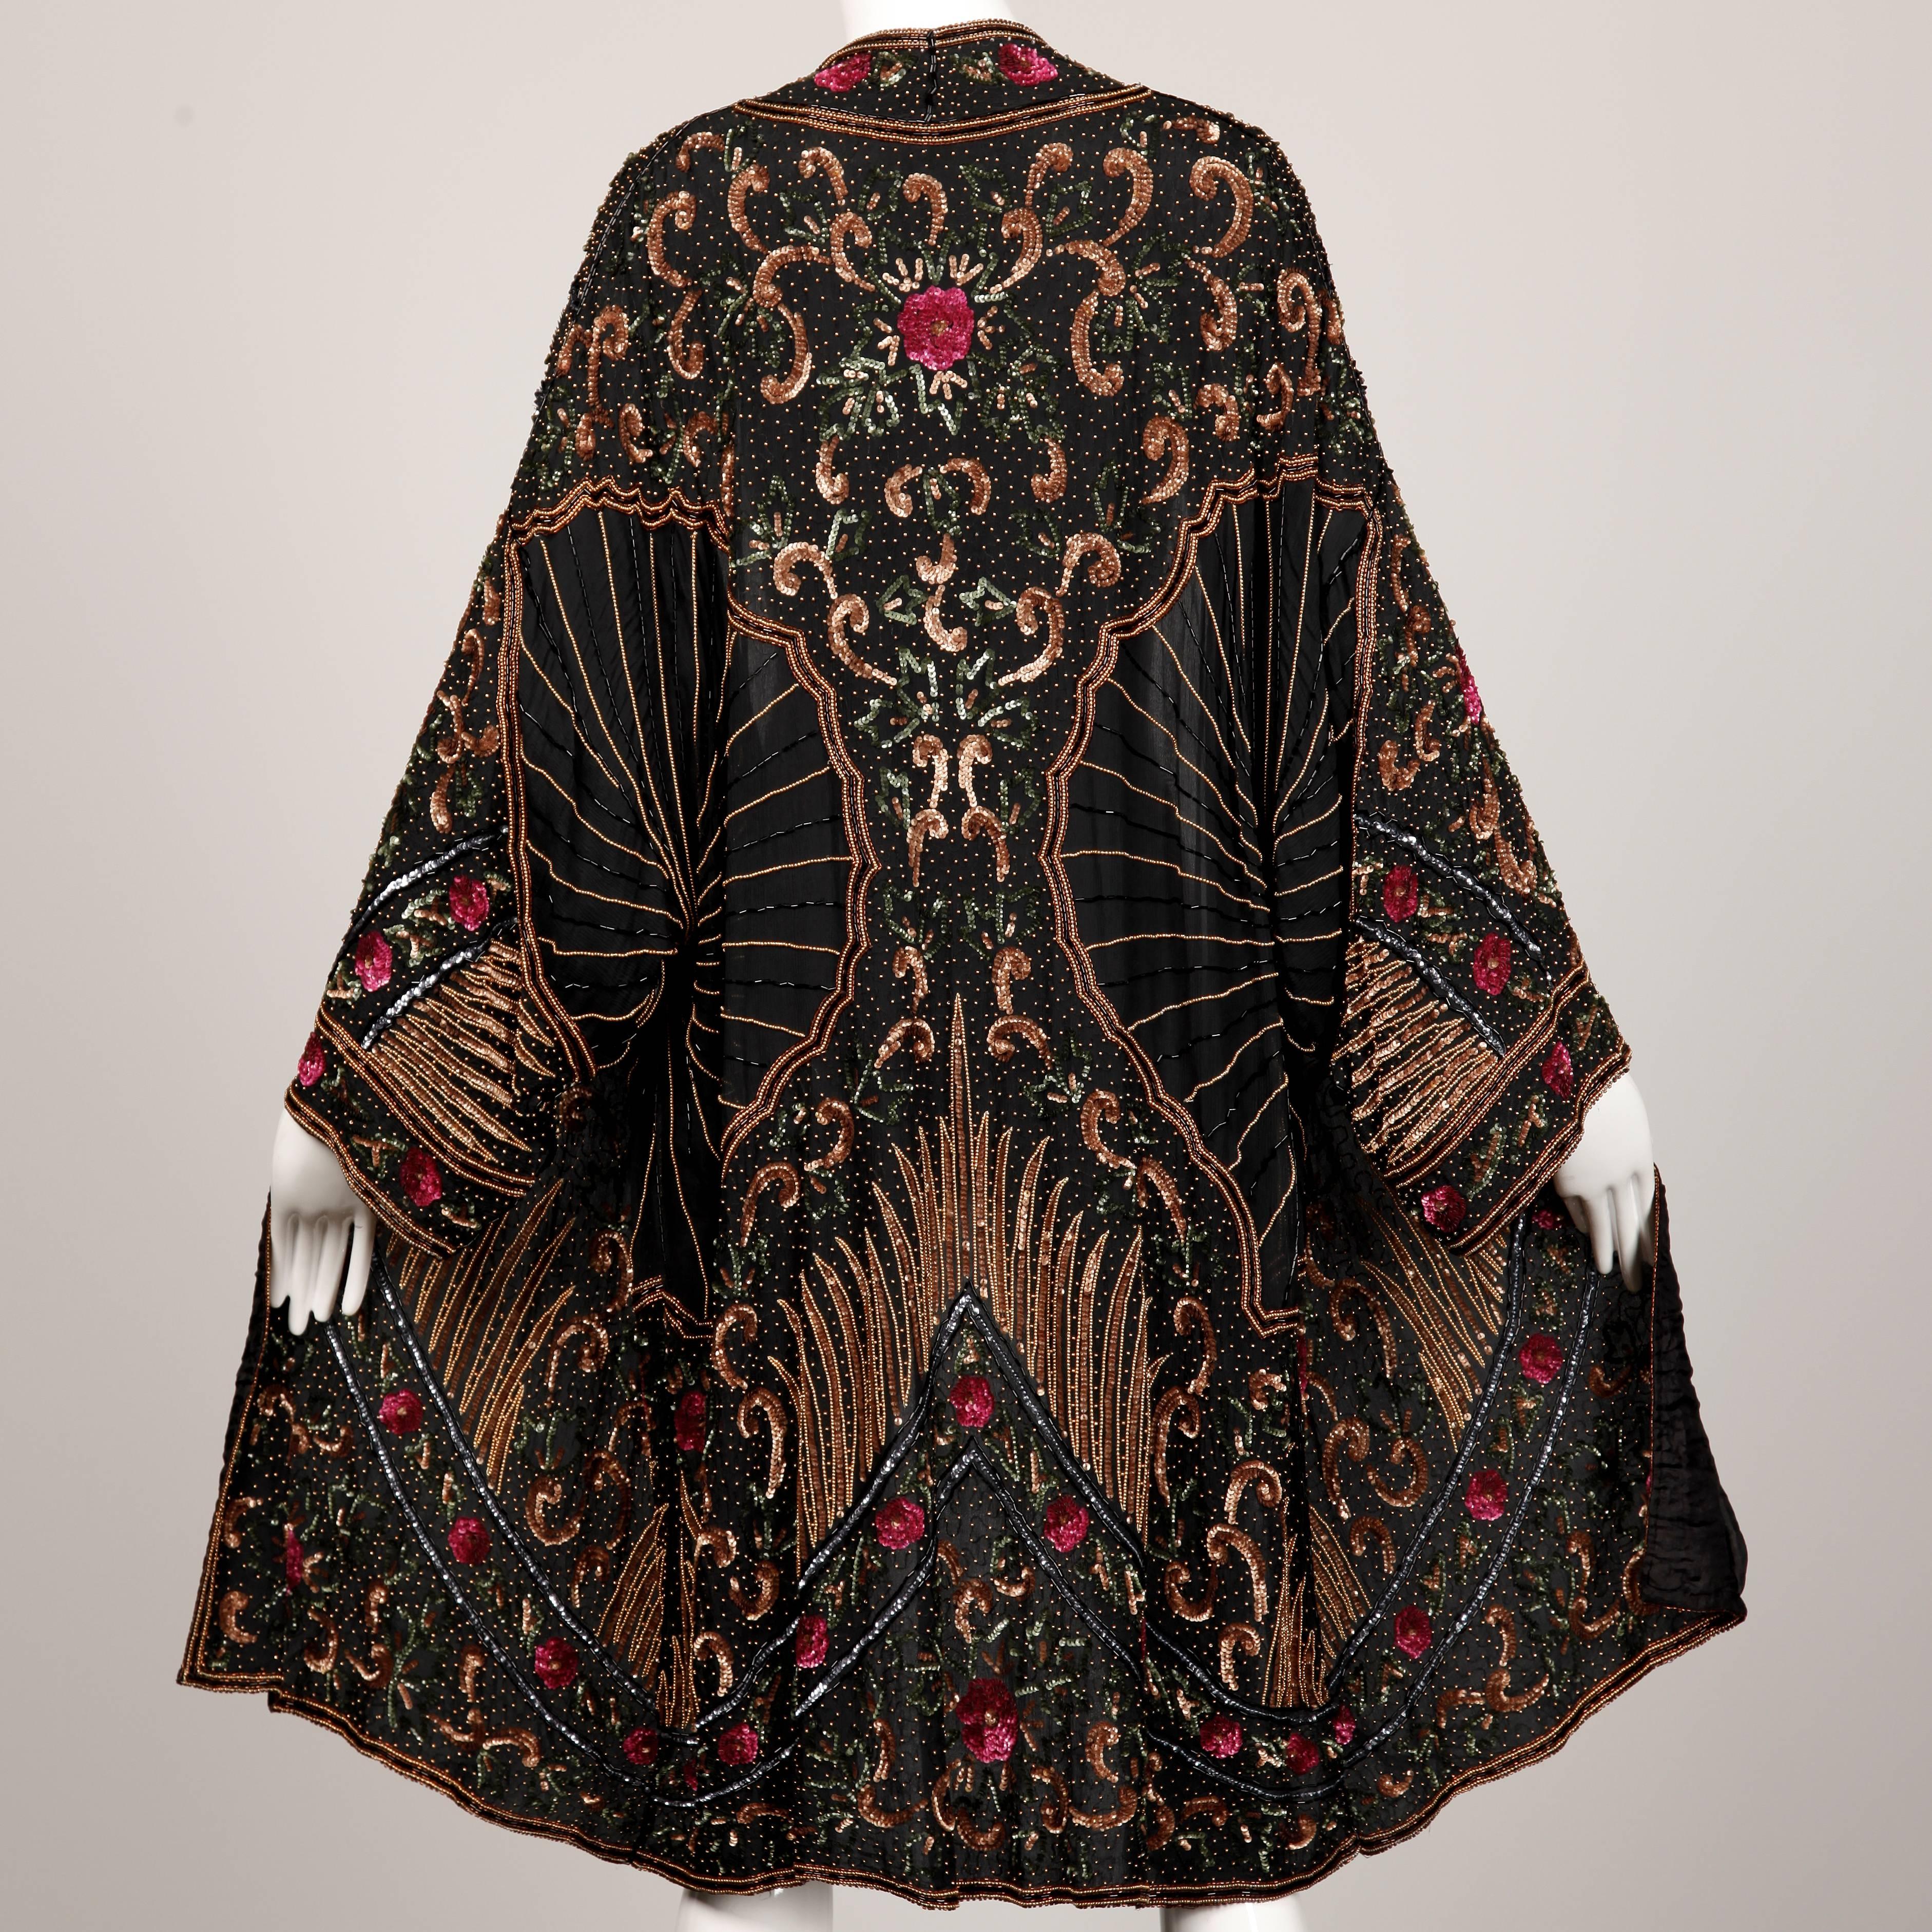 Elaborately beaded silk duster jacket by Judith Ann with an oversized fit. Stunning 1920s-inspired design. Fully lined in silk. No closure/ hangs open. The marked size is large, but it should fit sizes XS-XL due to the oversized fit. The bust, waist